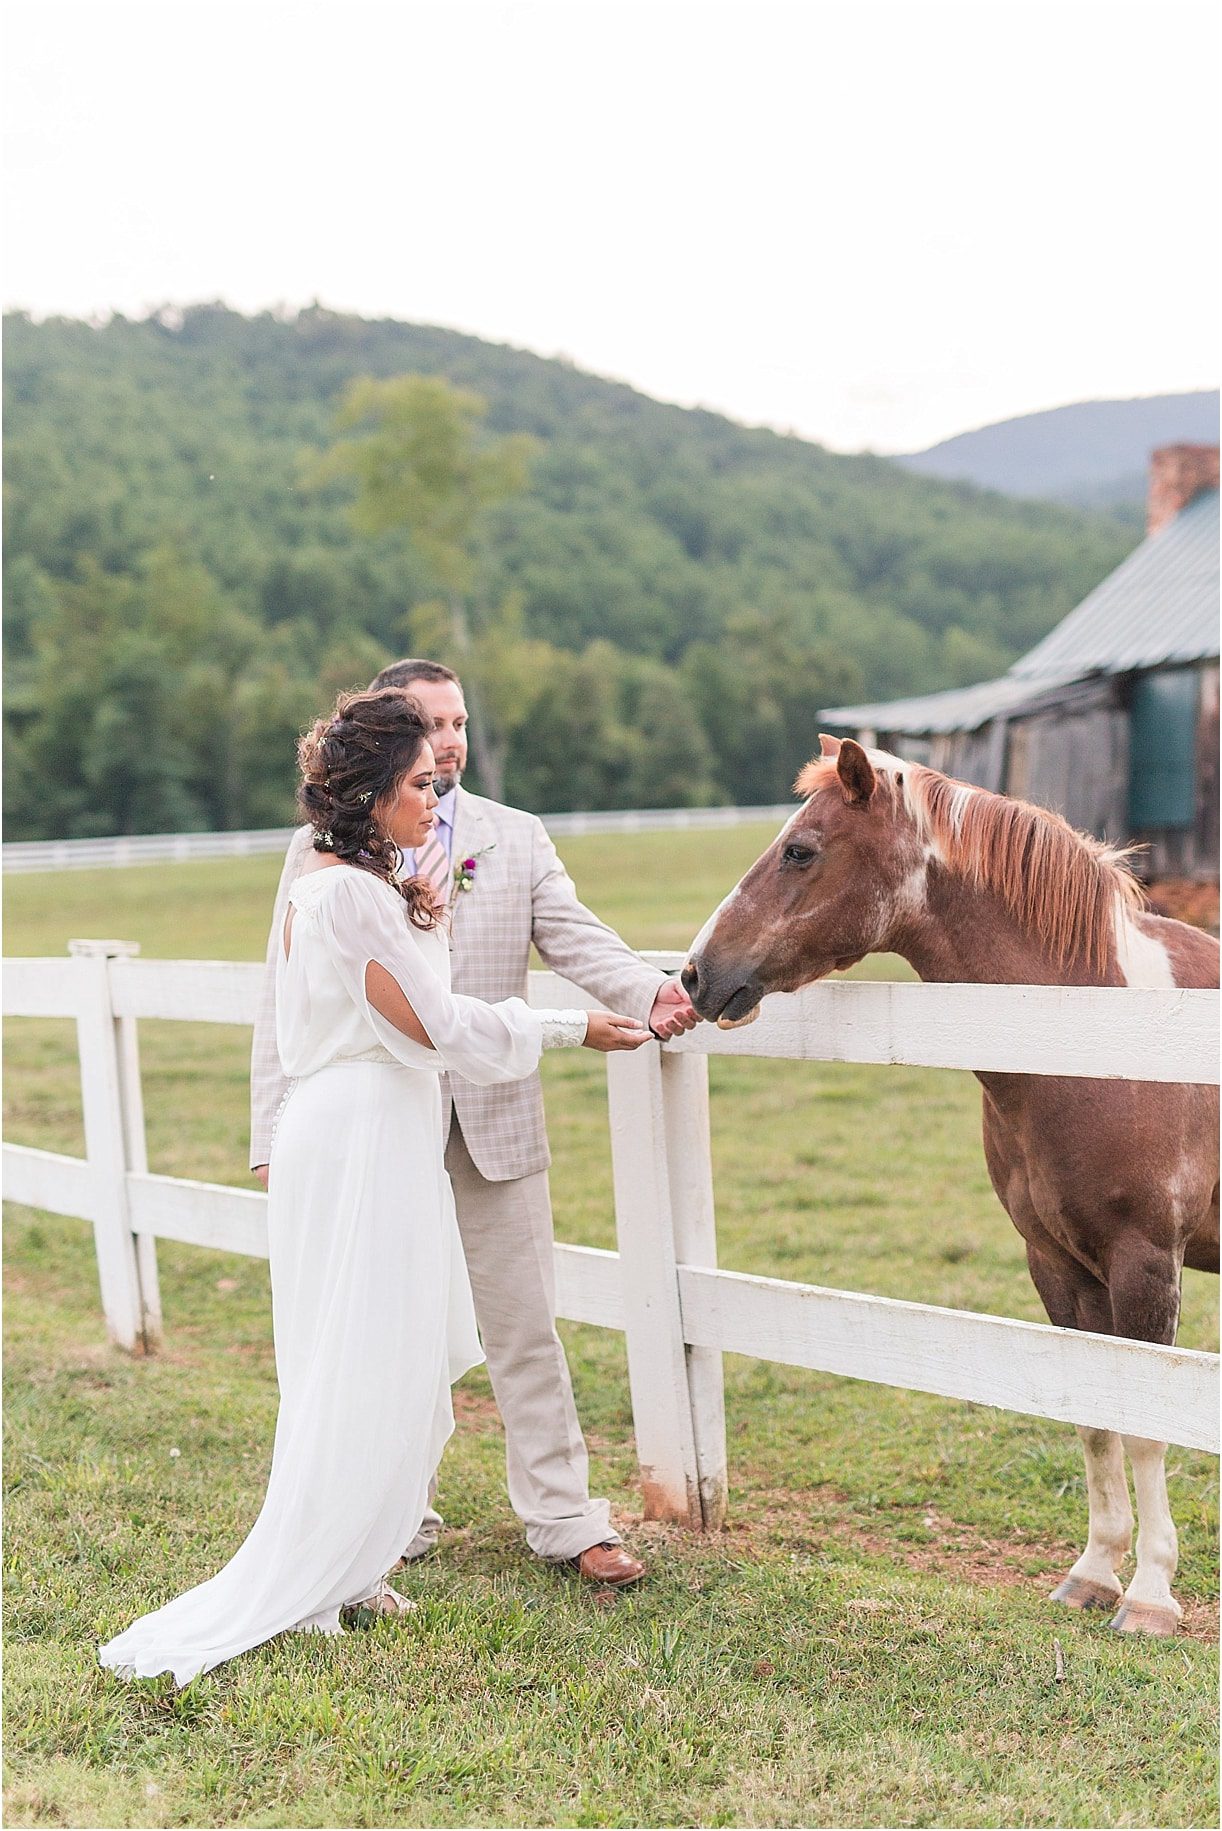 Styled Elopement with Boho Vibes | Hill City Bride Virginia Wedding Blog